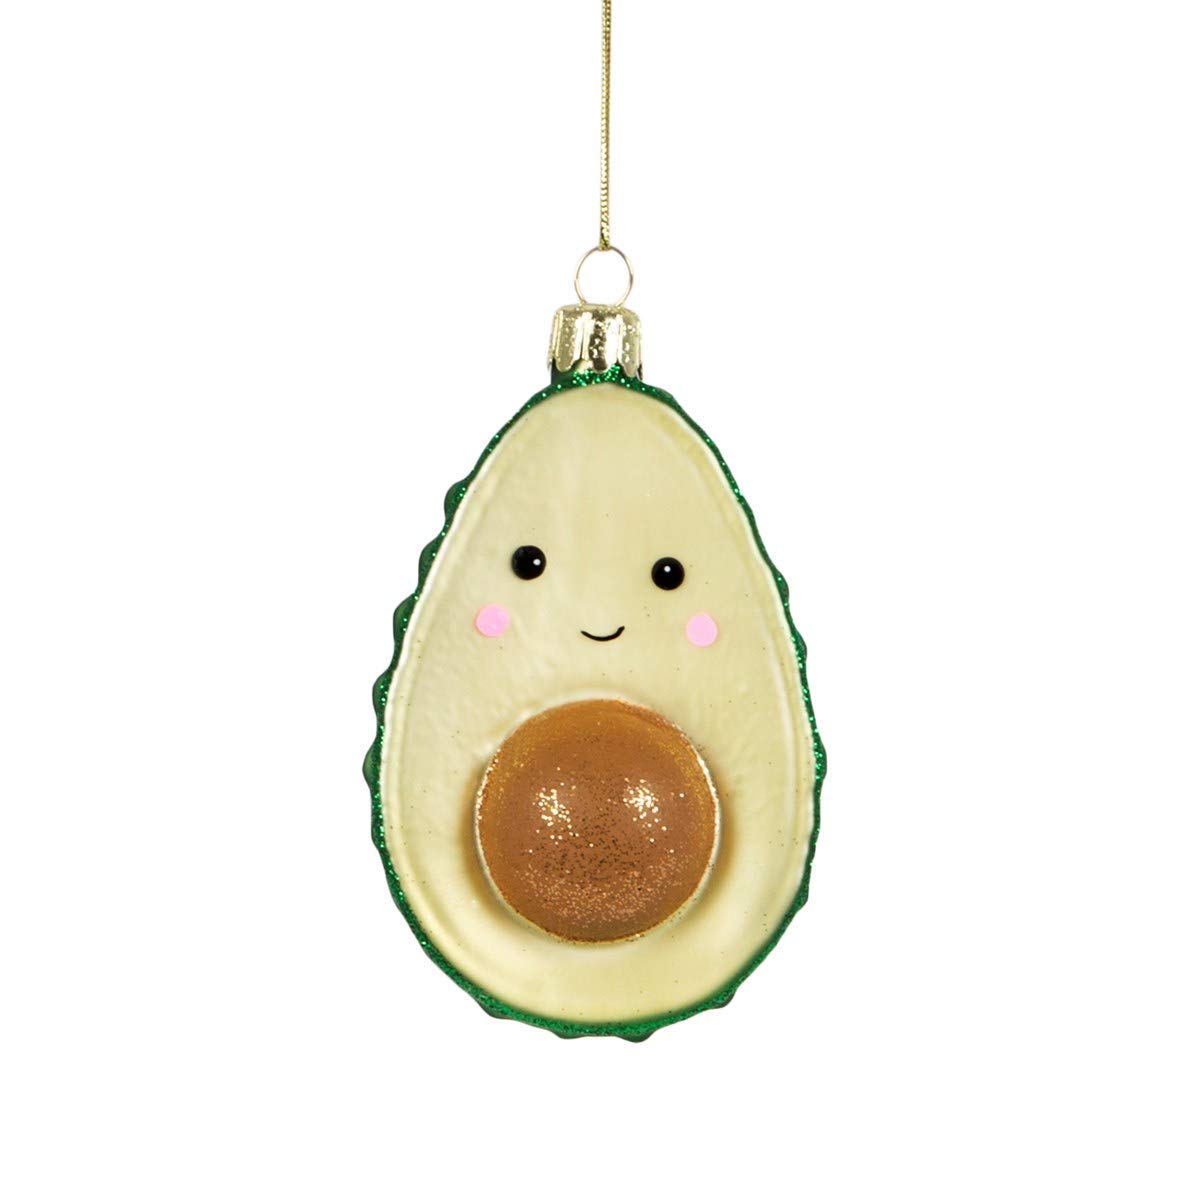 Sass and Belle Sparkly Novelty Avocado Christmas Tree Bauble